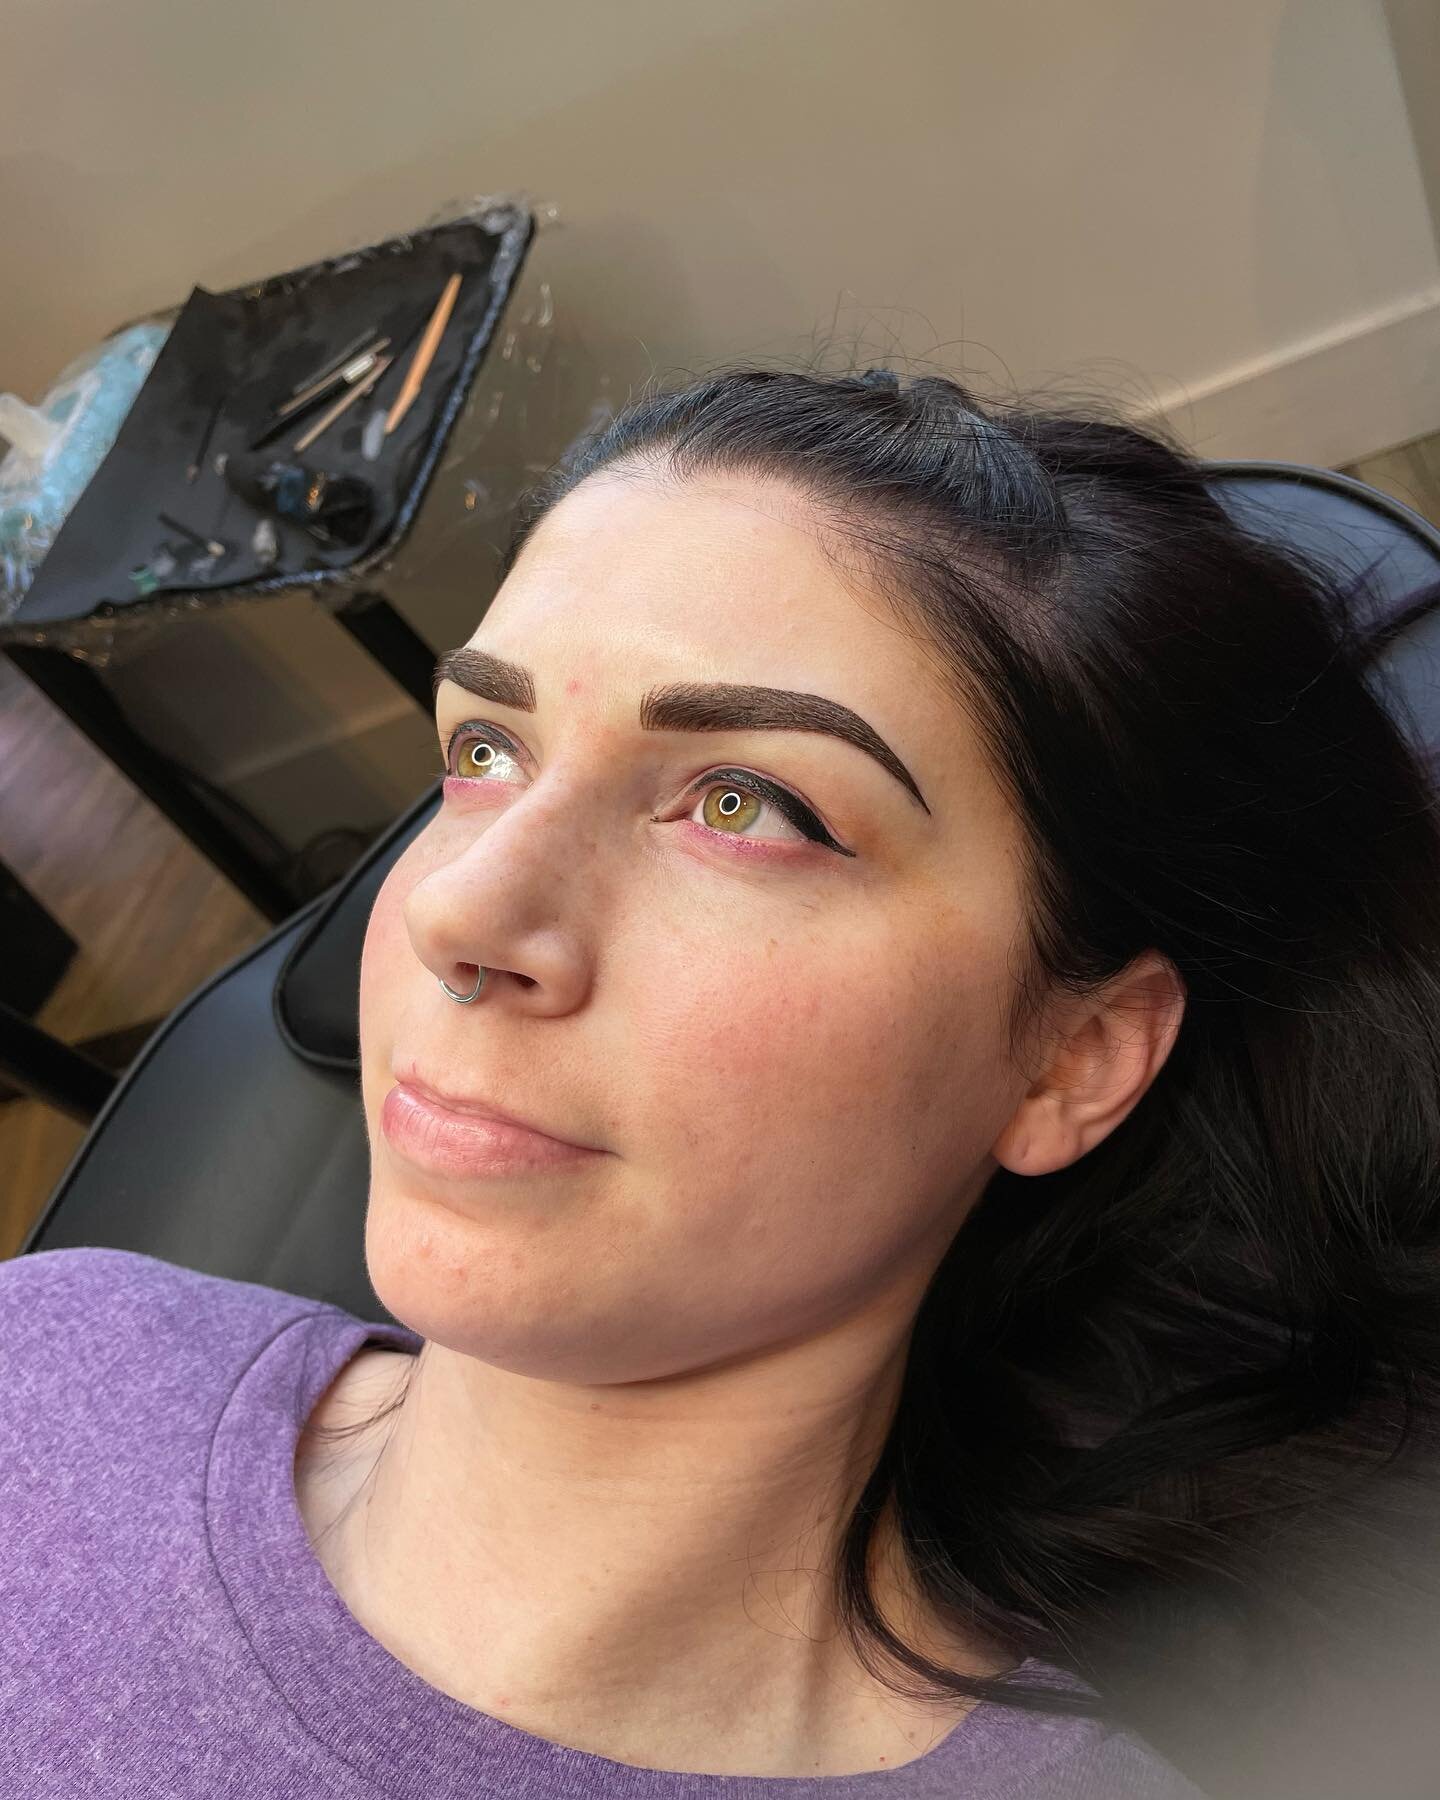 This client had some previous work done that she was looking to cover up as well as a medical condition that causes some hair loss. We had a consultation as I do with all my clients and decided that a combo brow was the way to go! As with any previou